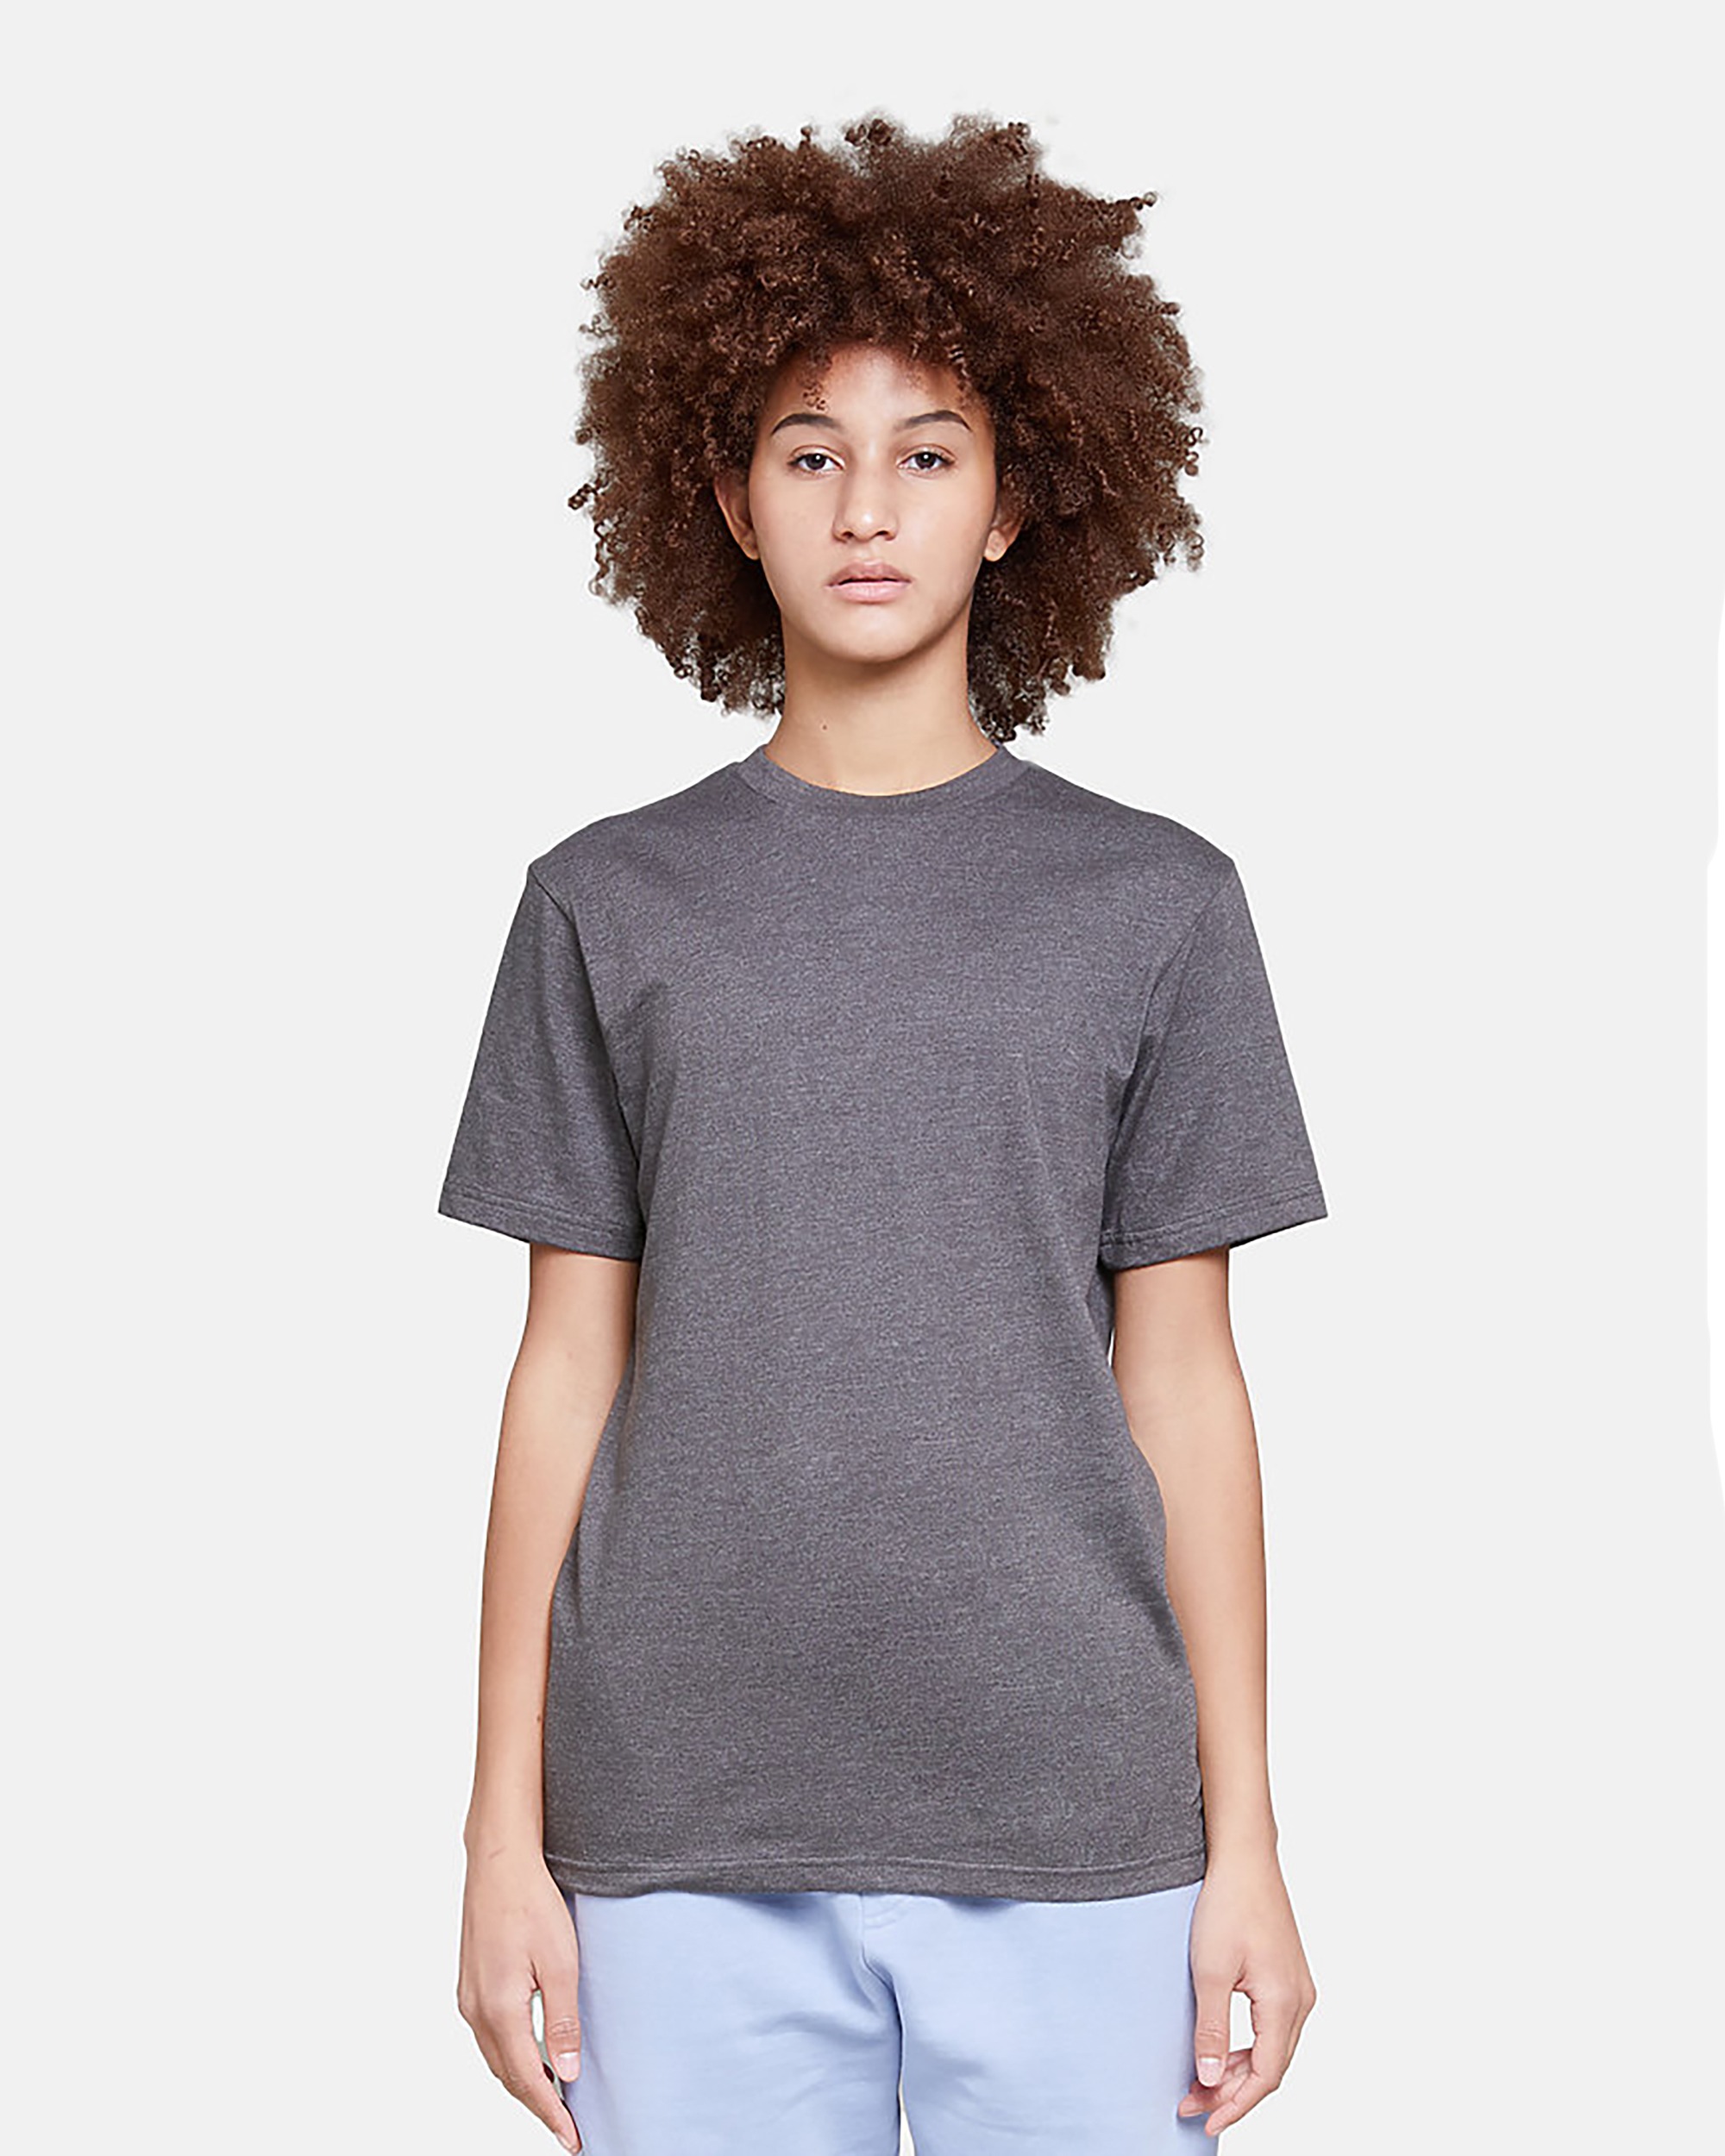 Lane Seven® LS15001 Heavyweight Tee, shown in Charcoal Heather